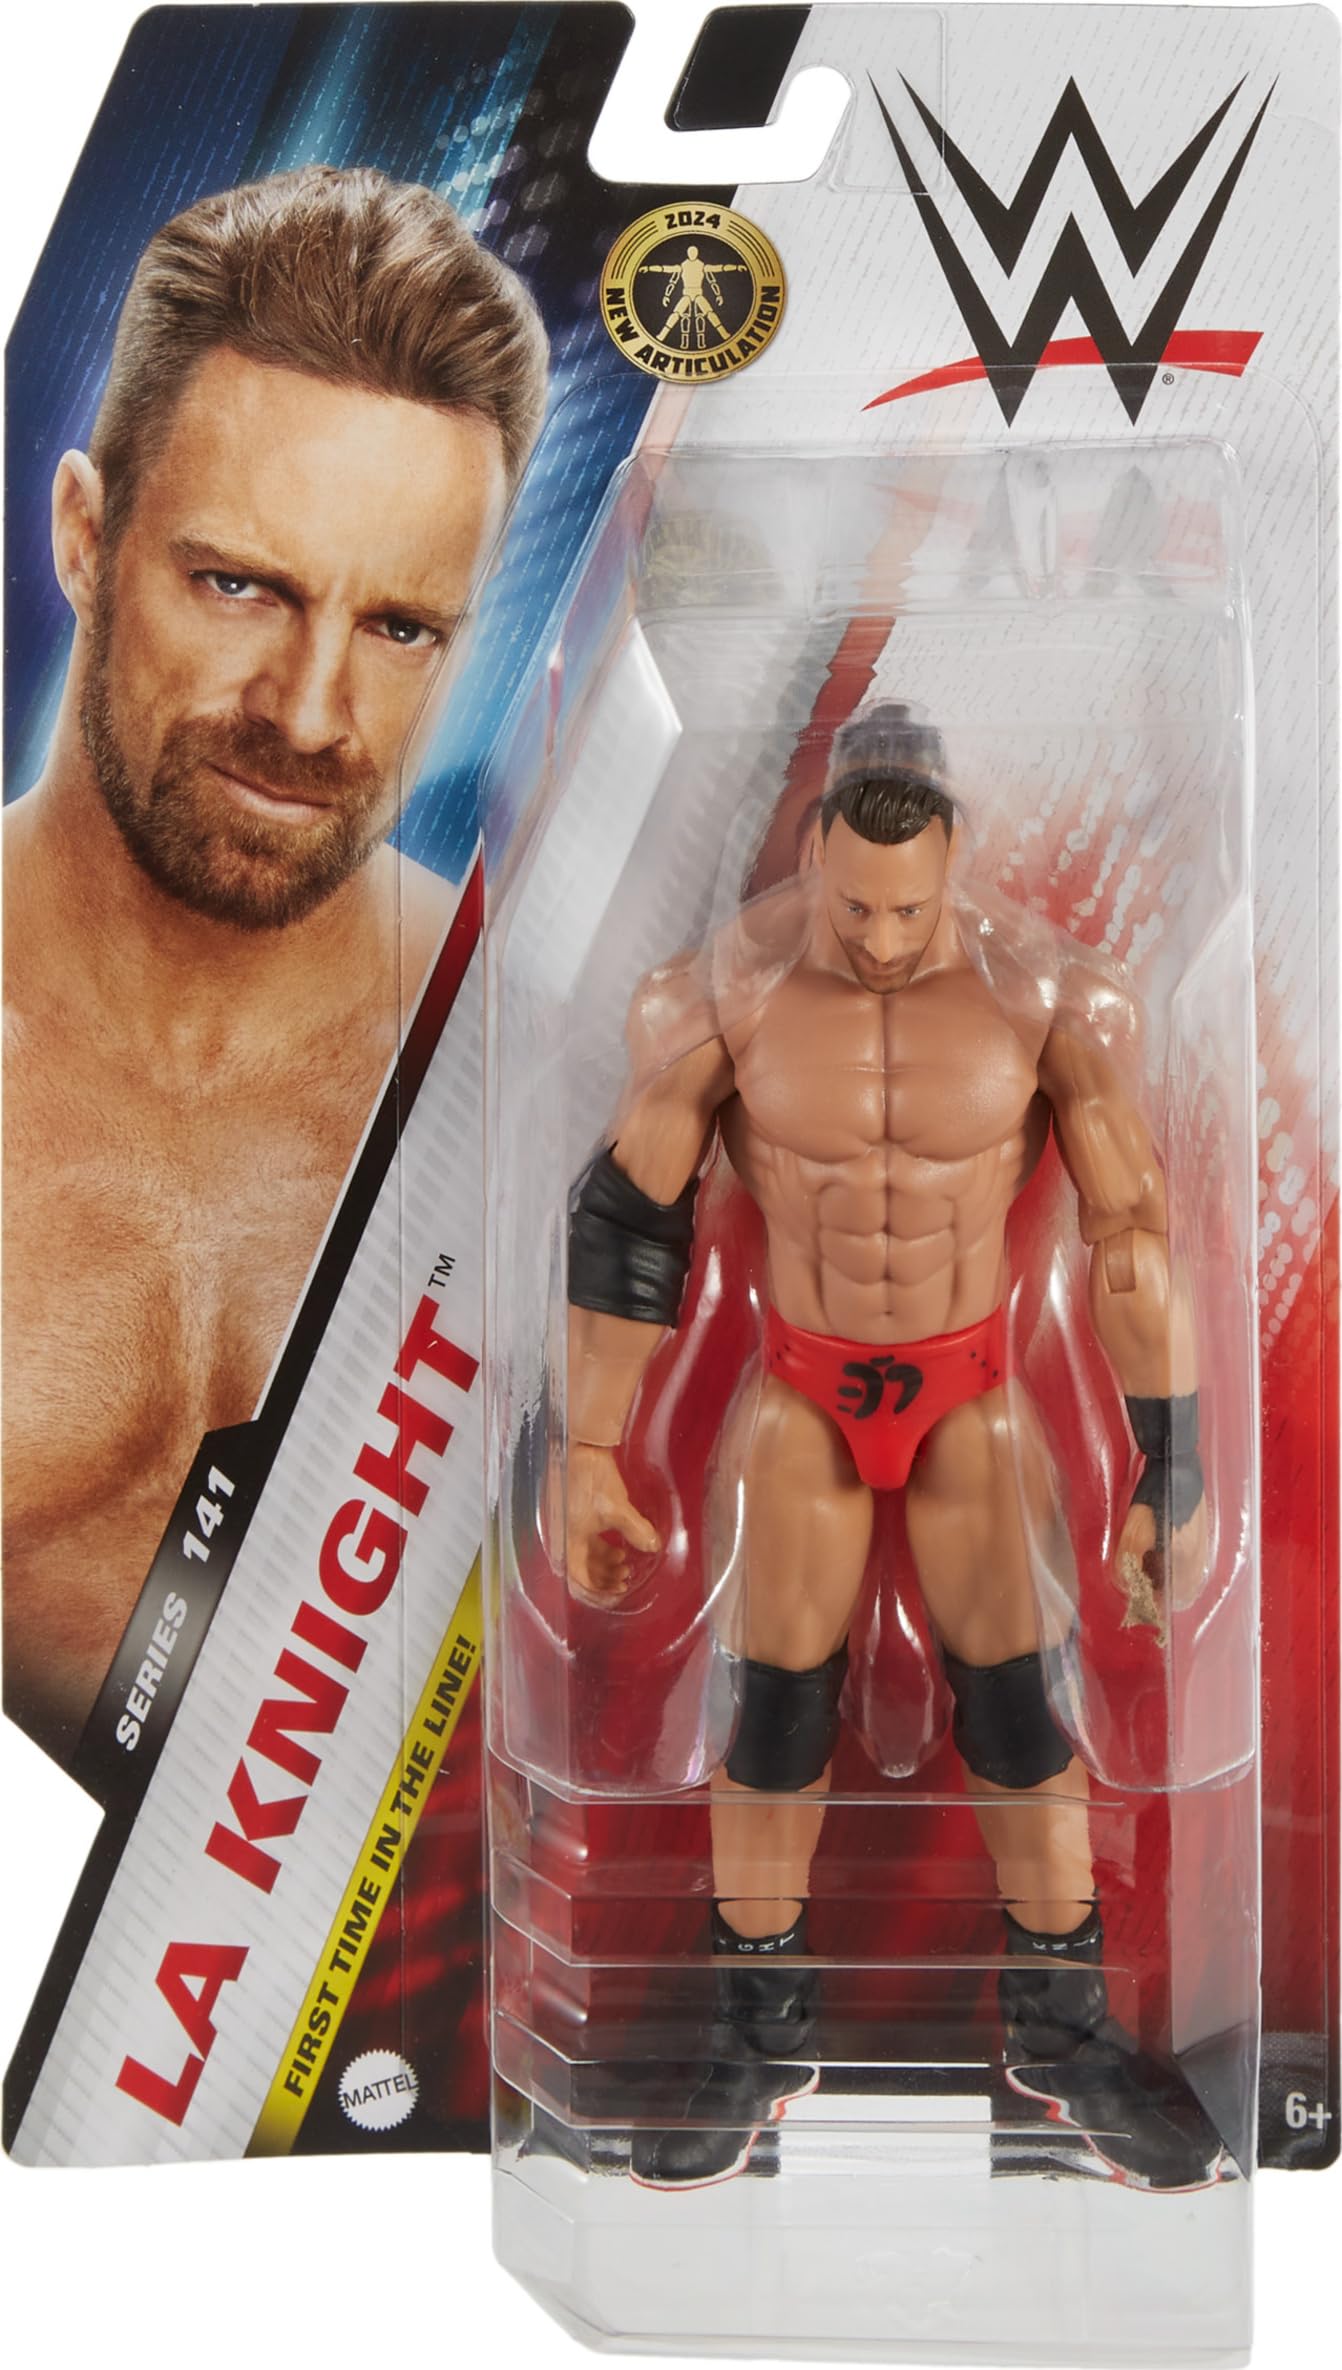 Mattel WWE Action Figure, 6-inch Collectible LA Knight with 10 Articulation Points & Life-Like Look